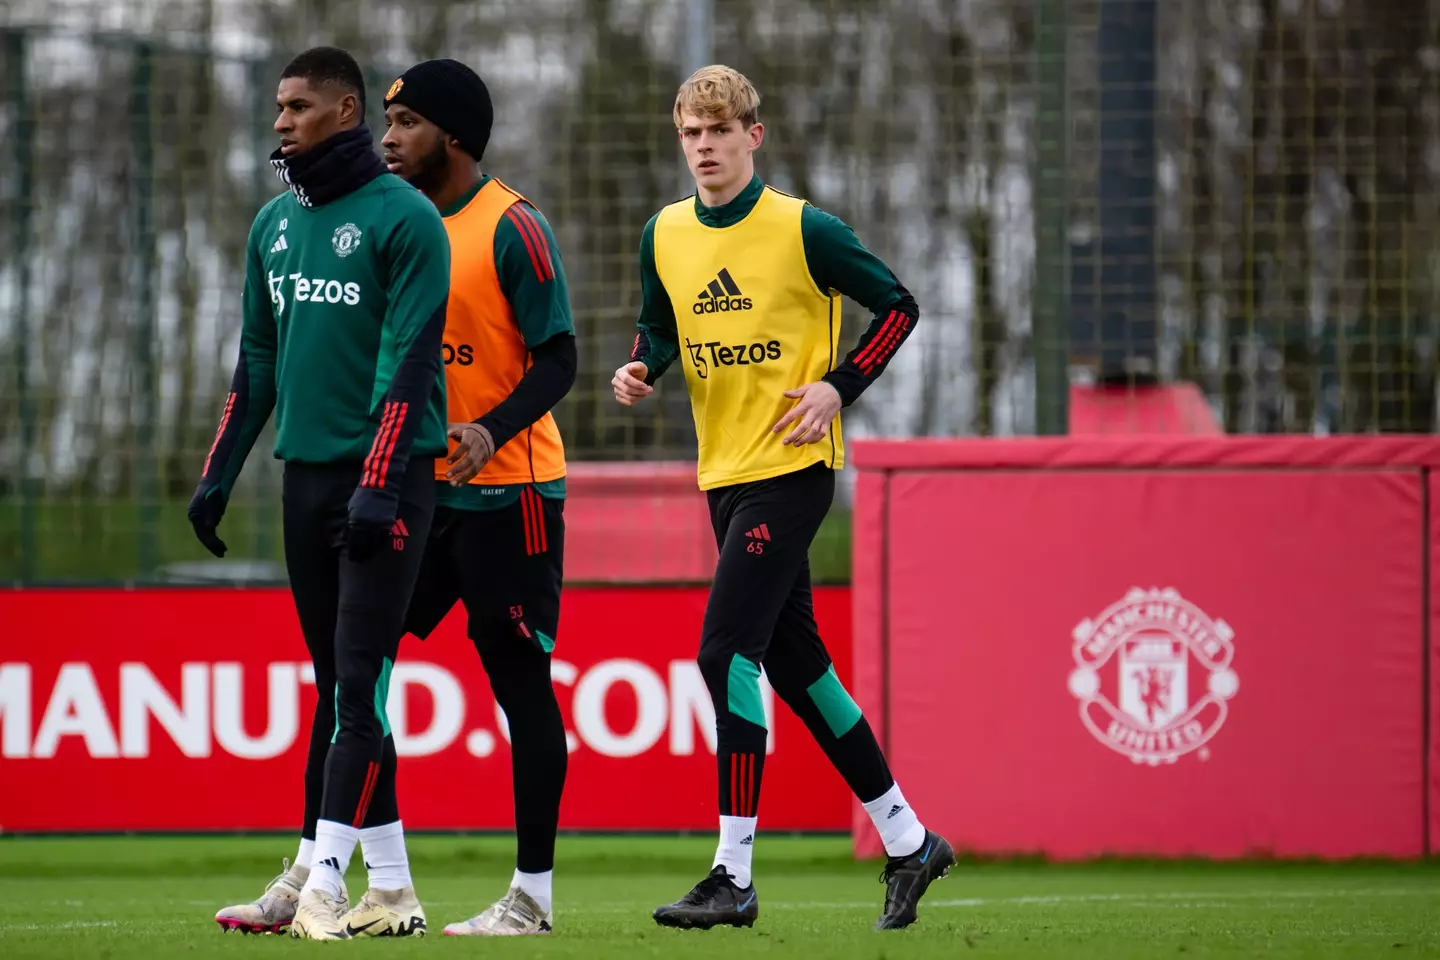 Toby Collyer in Manchester United training (